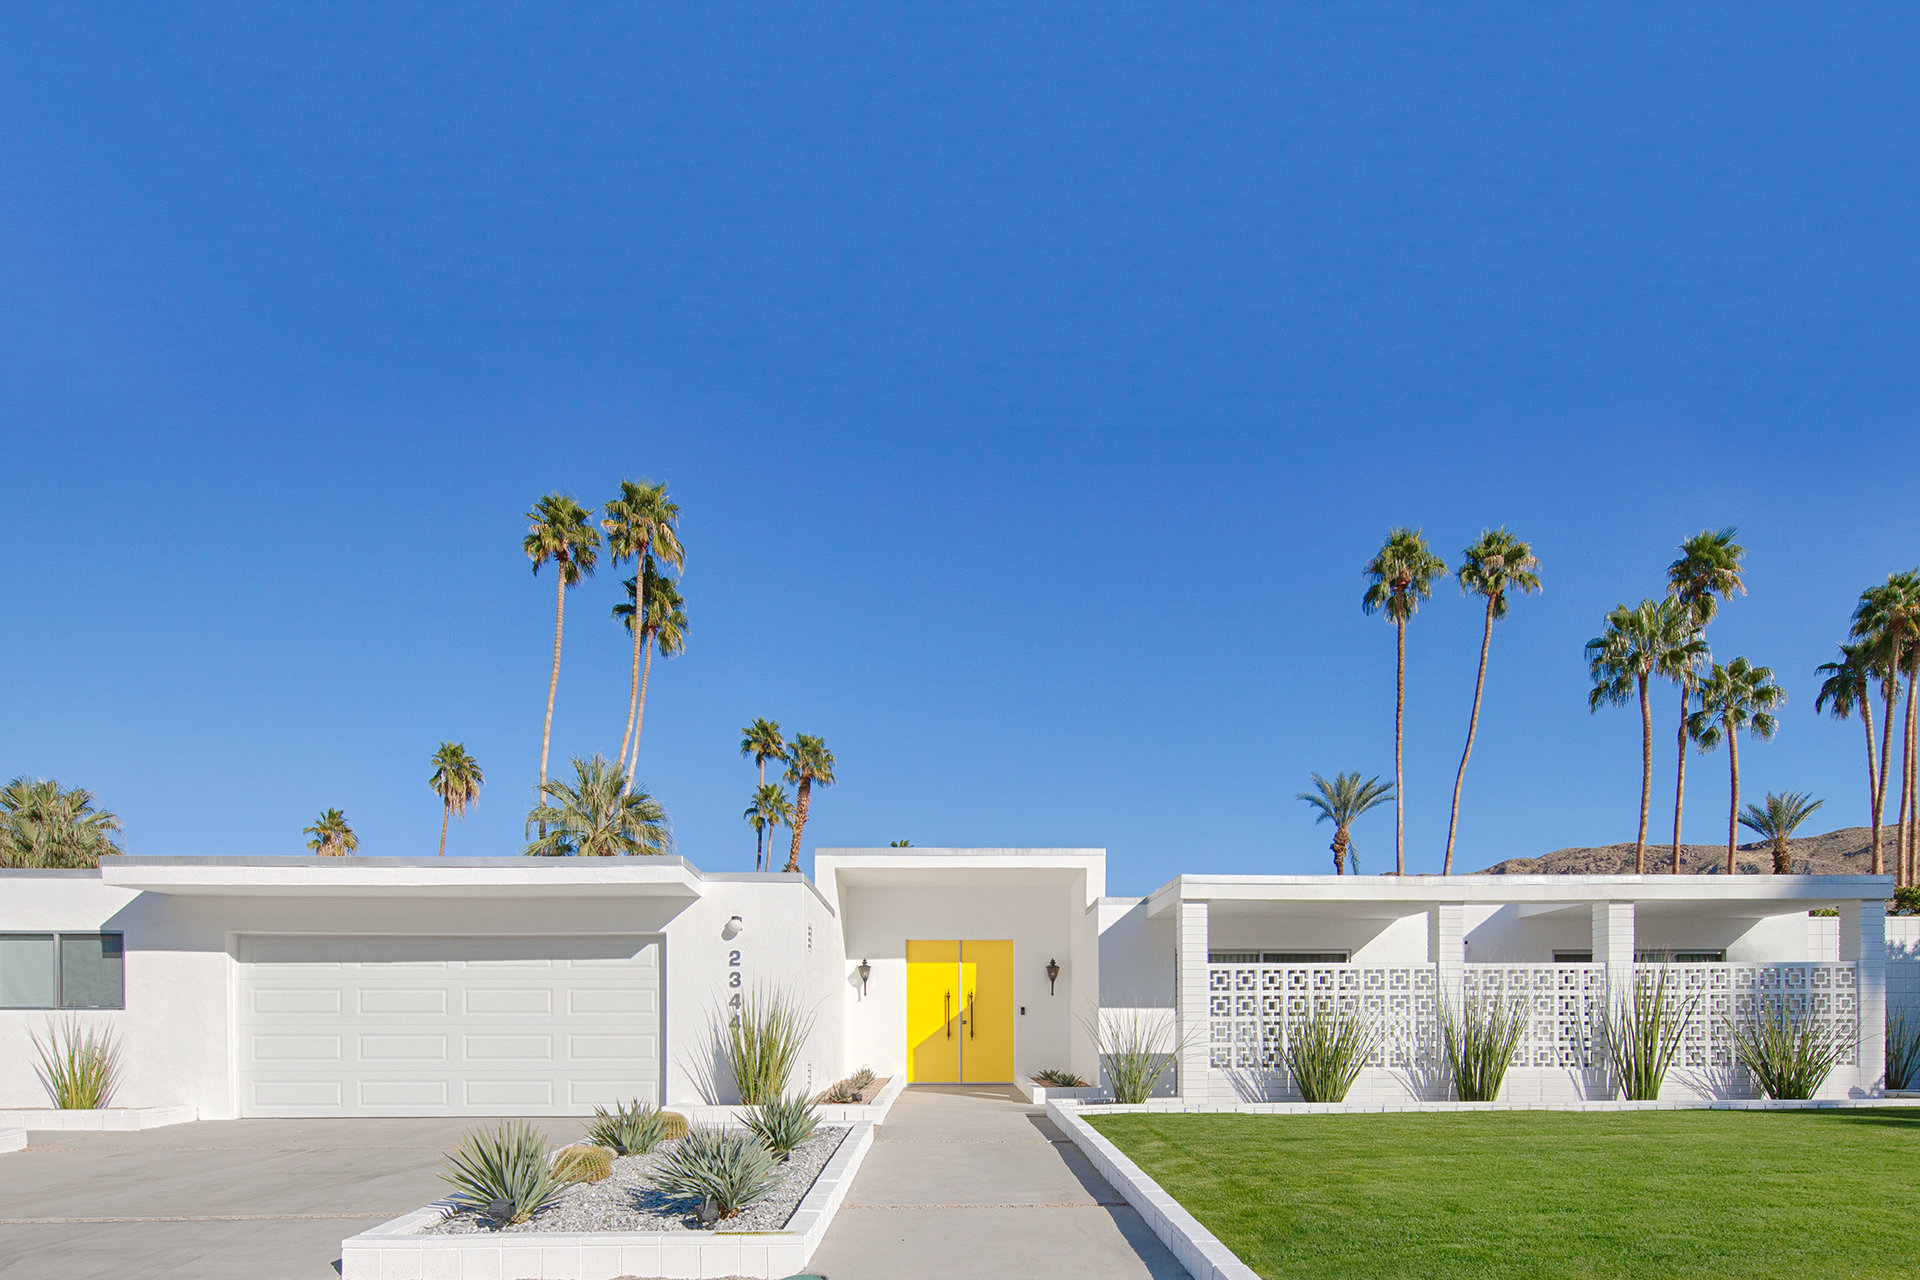 A mid-century home in the Indian Canyons neighborhood in Palm Springs, CA